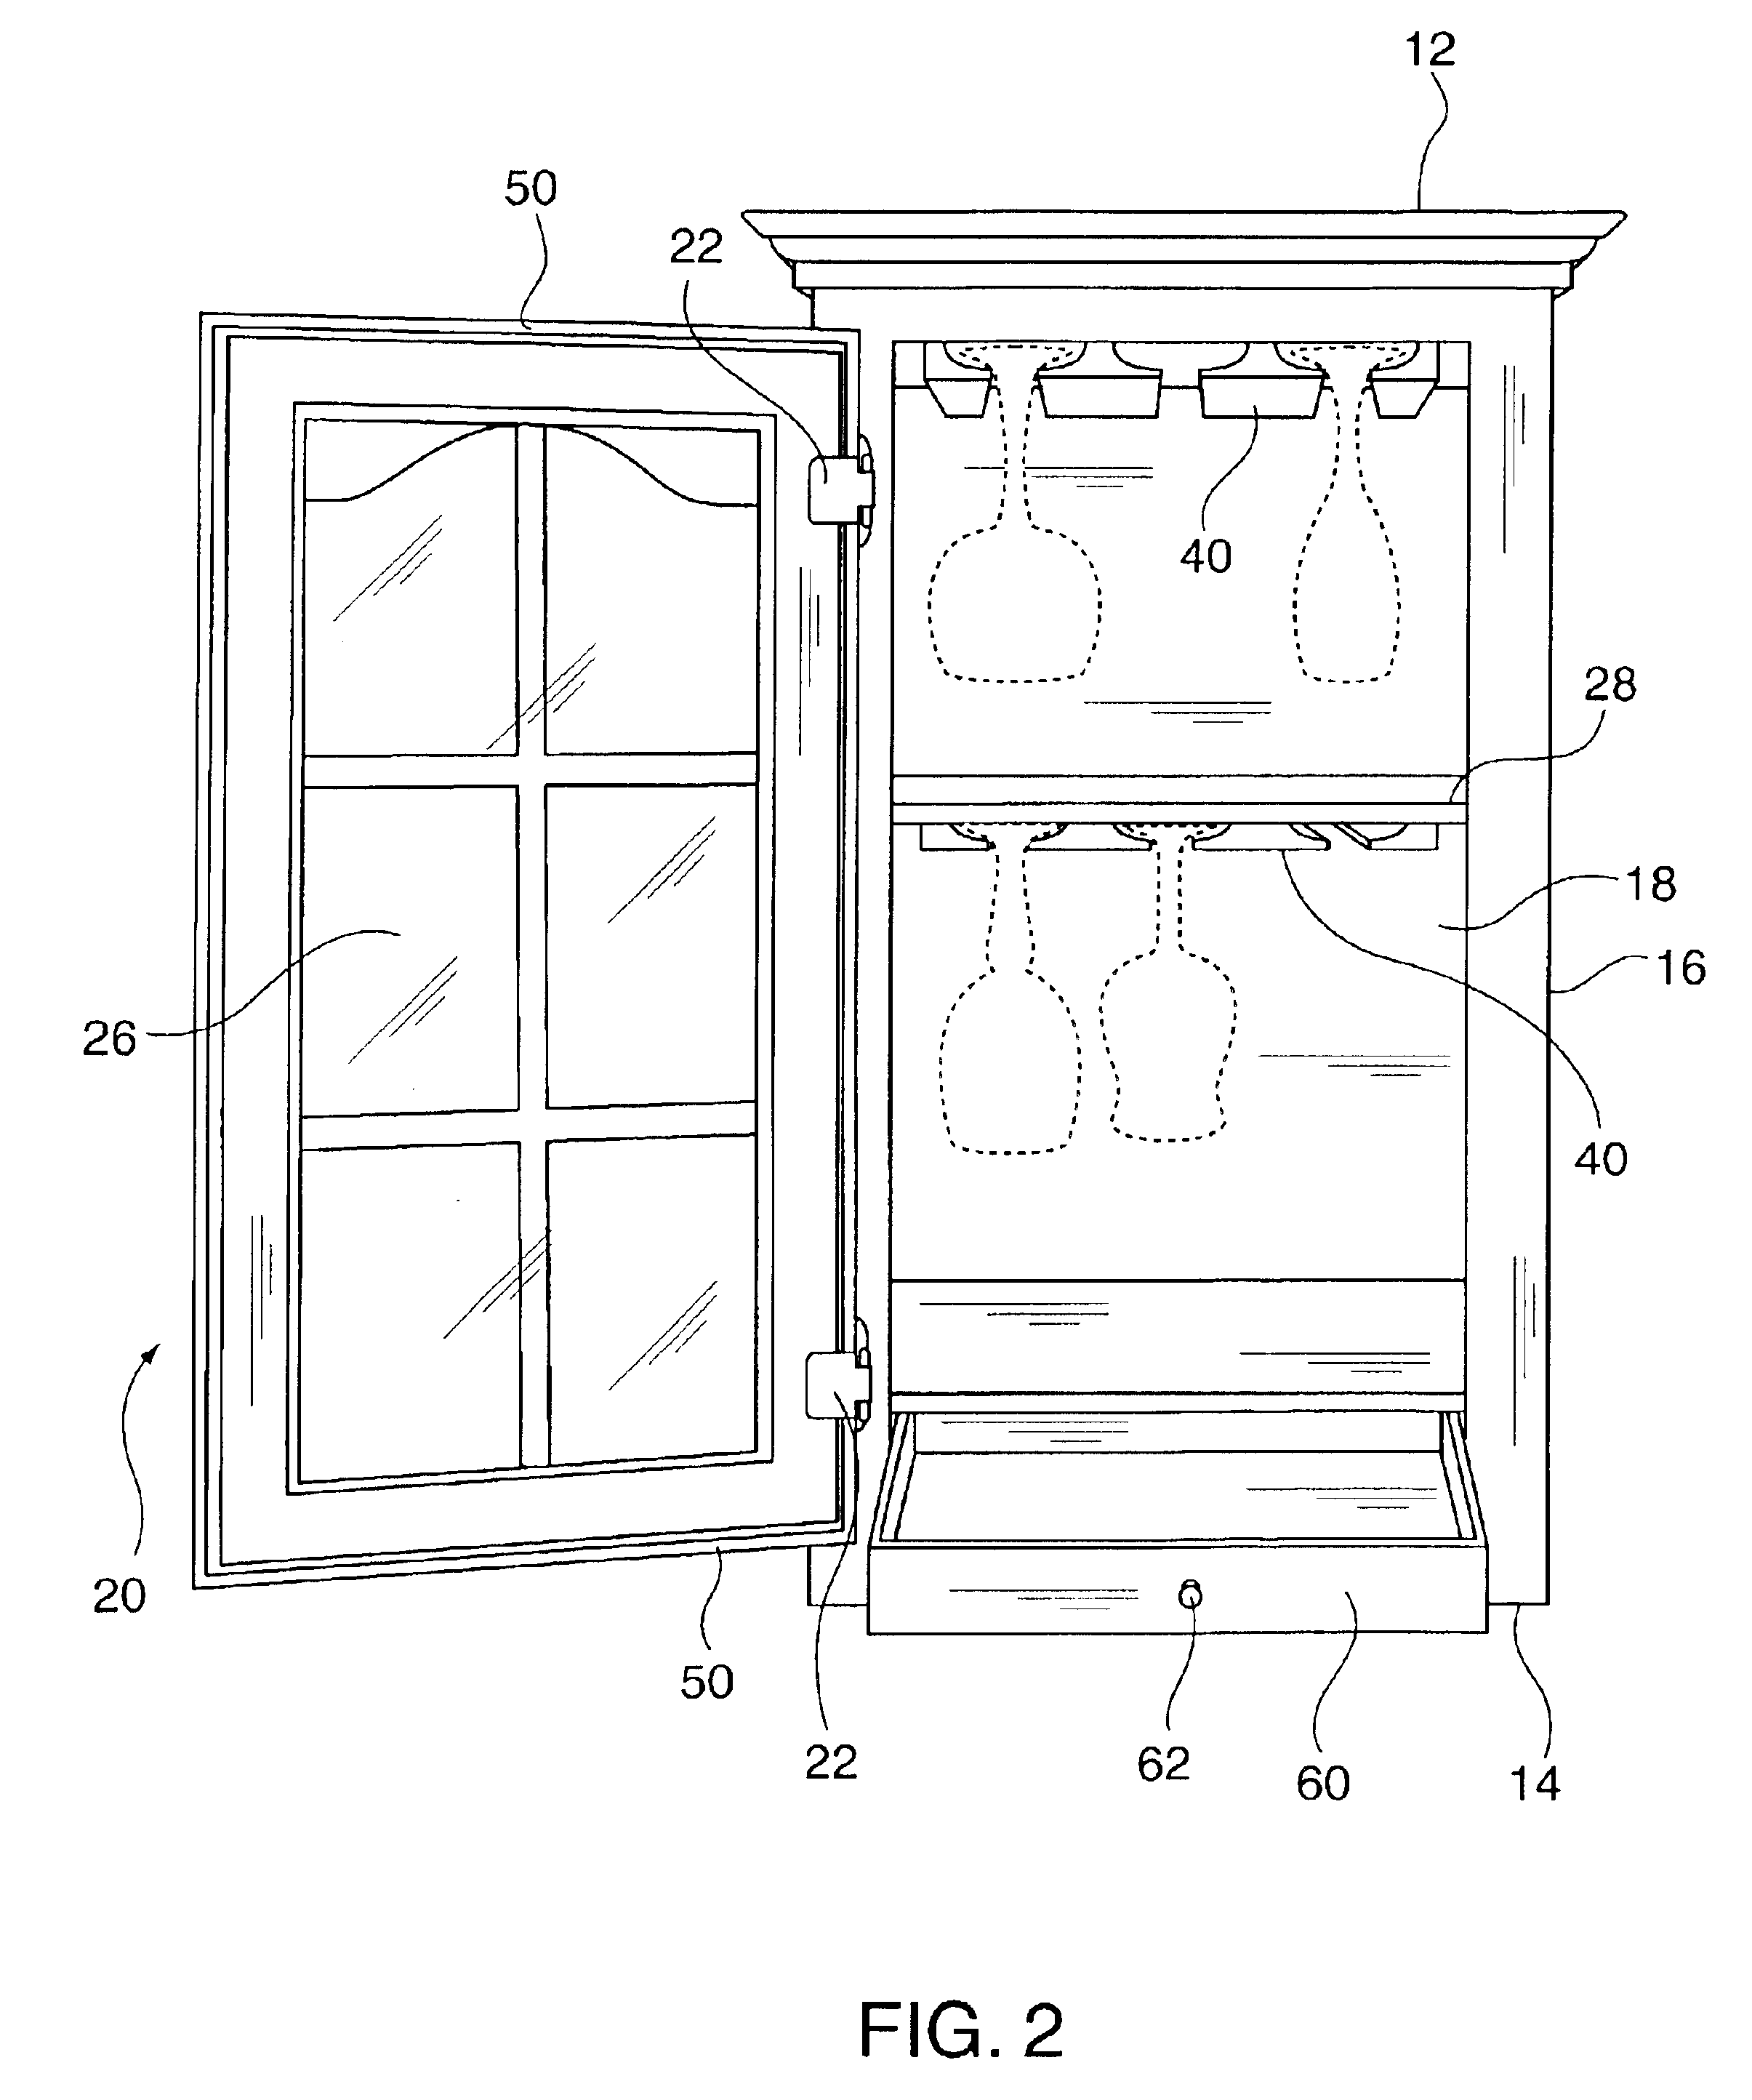 Drinking glass display and storage cabinet